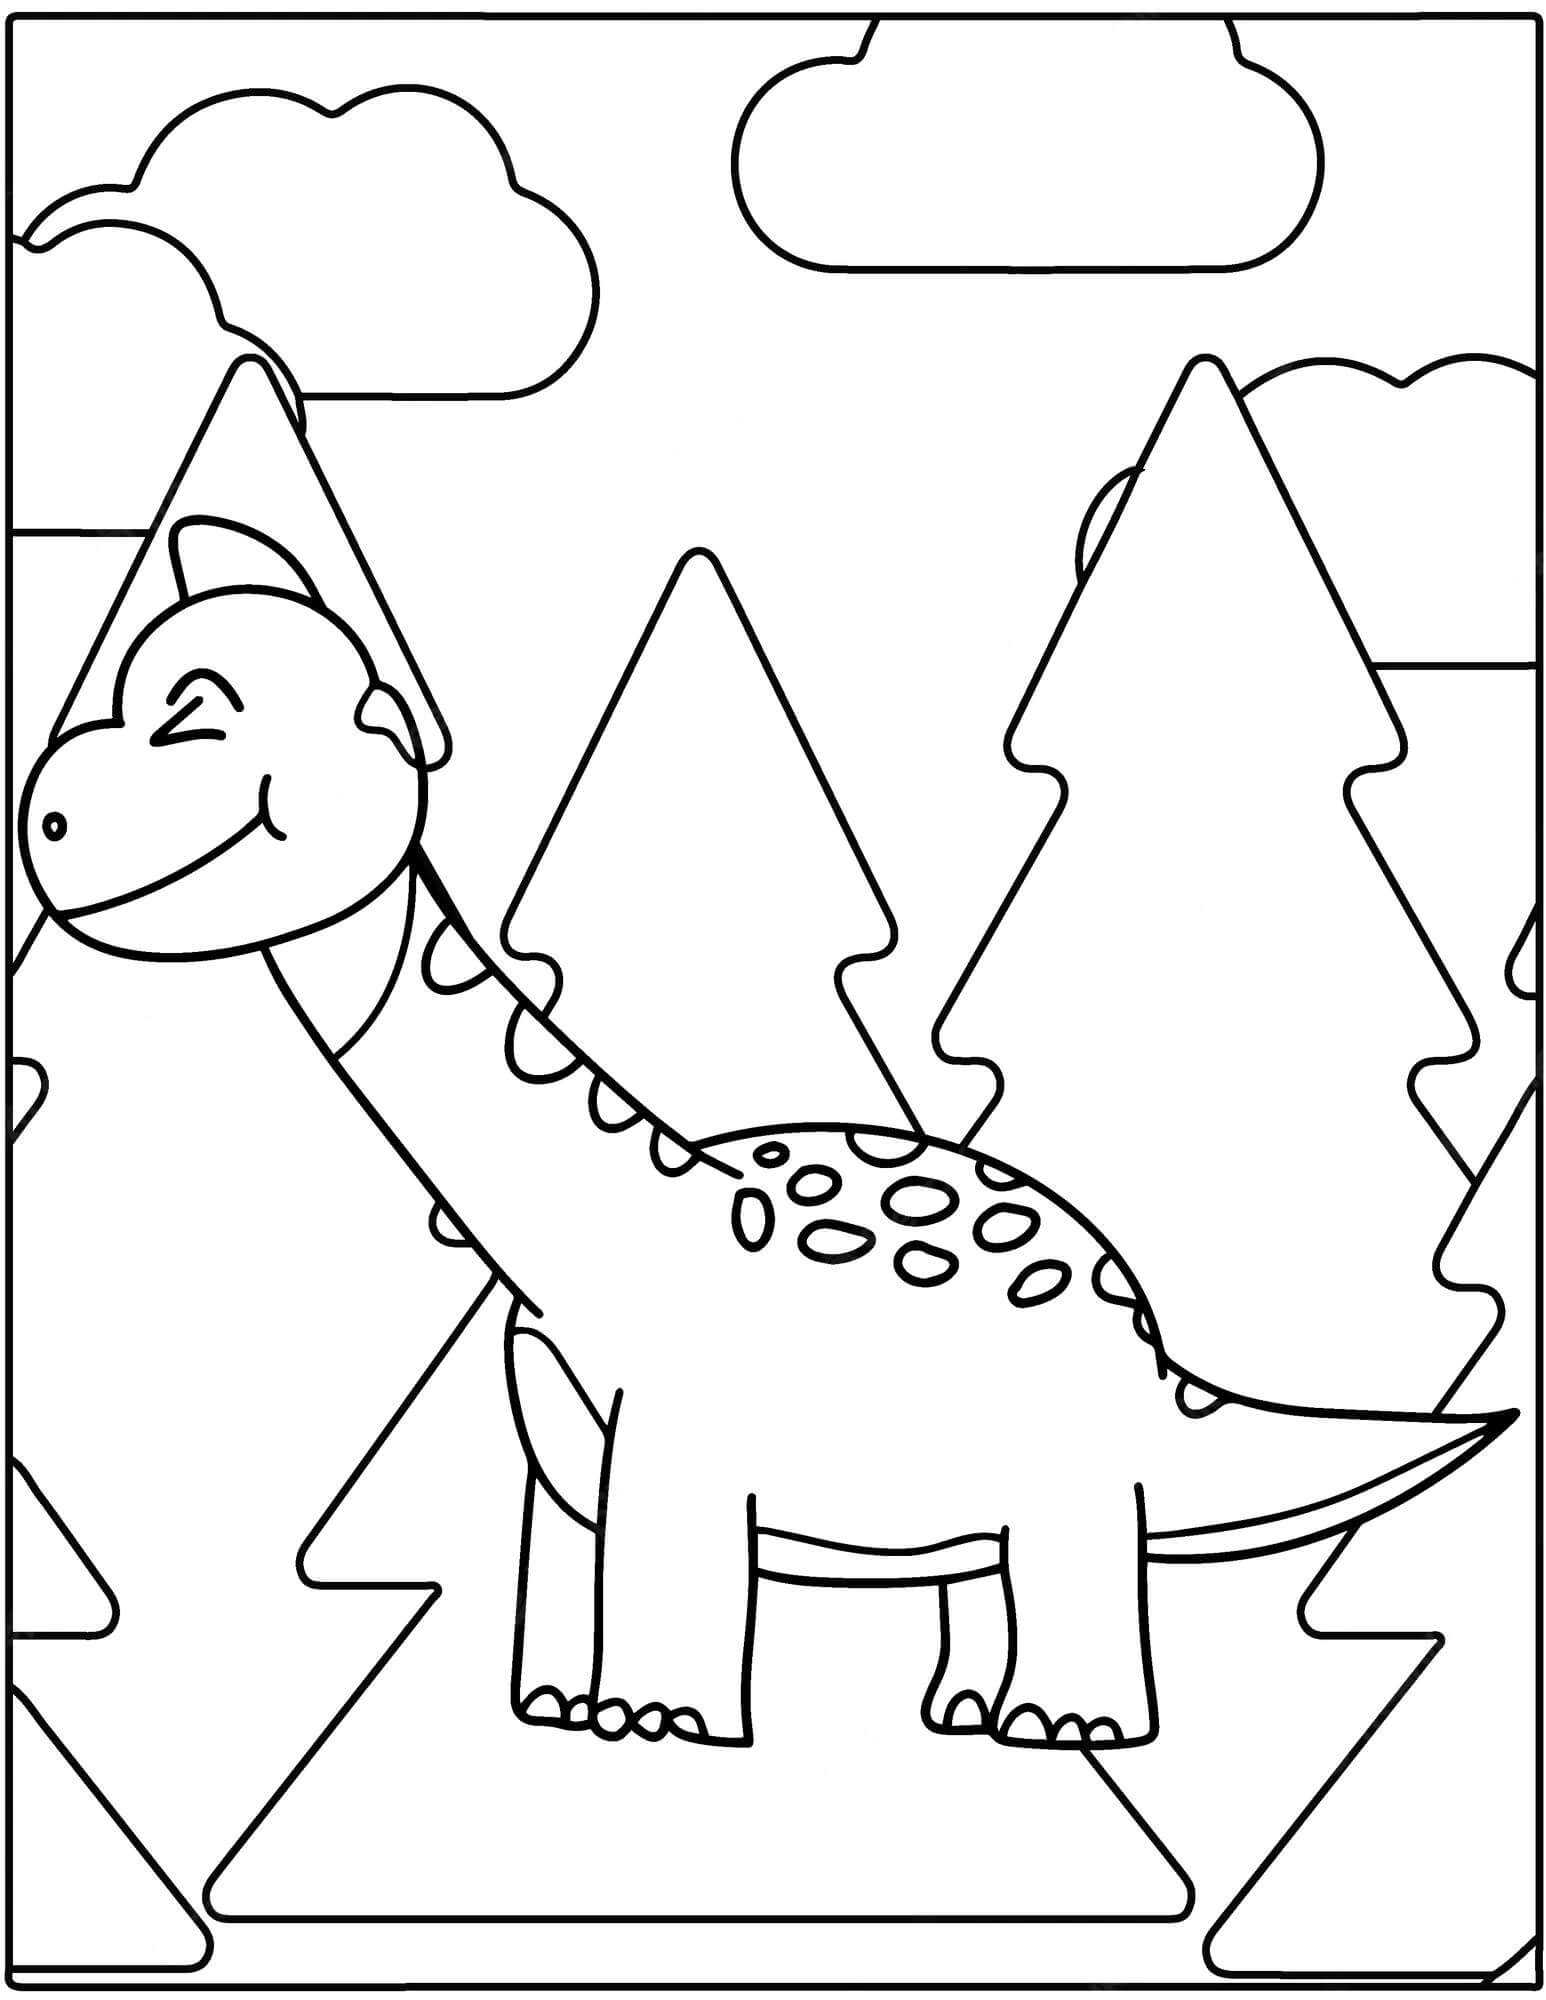 Cartoon Dinosaur with Trees and Clouds